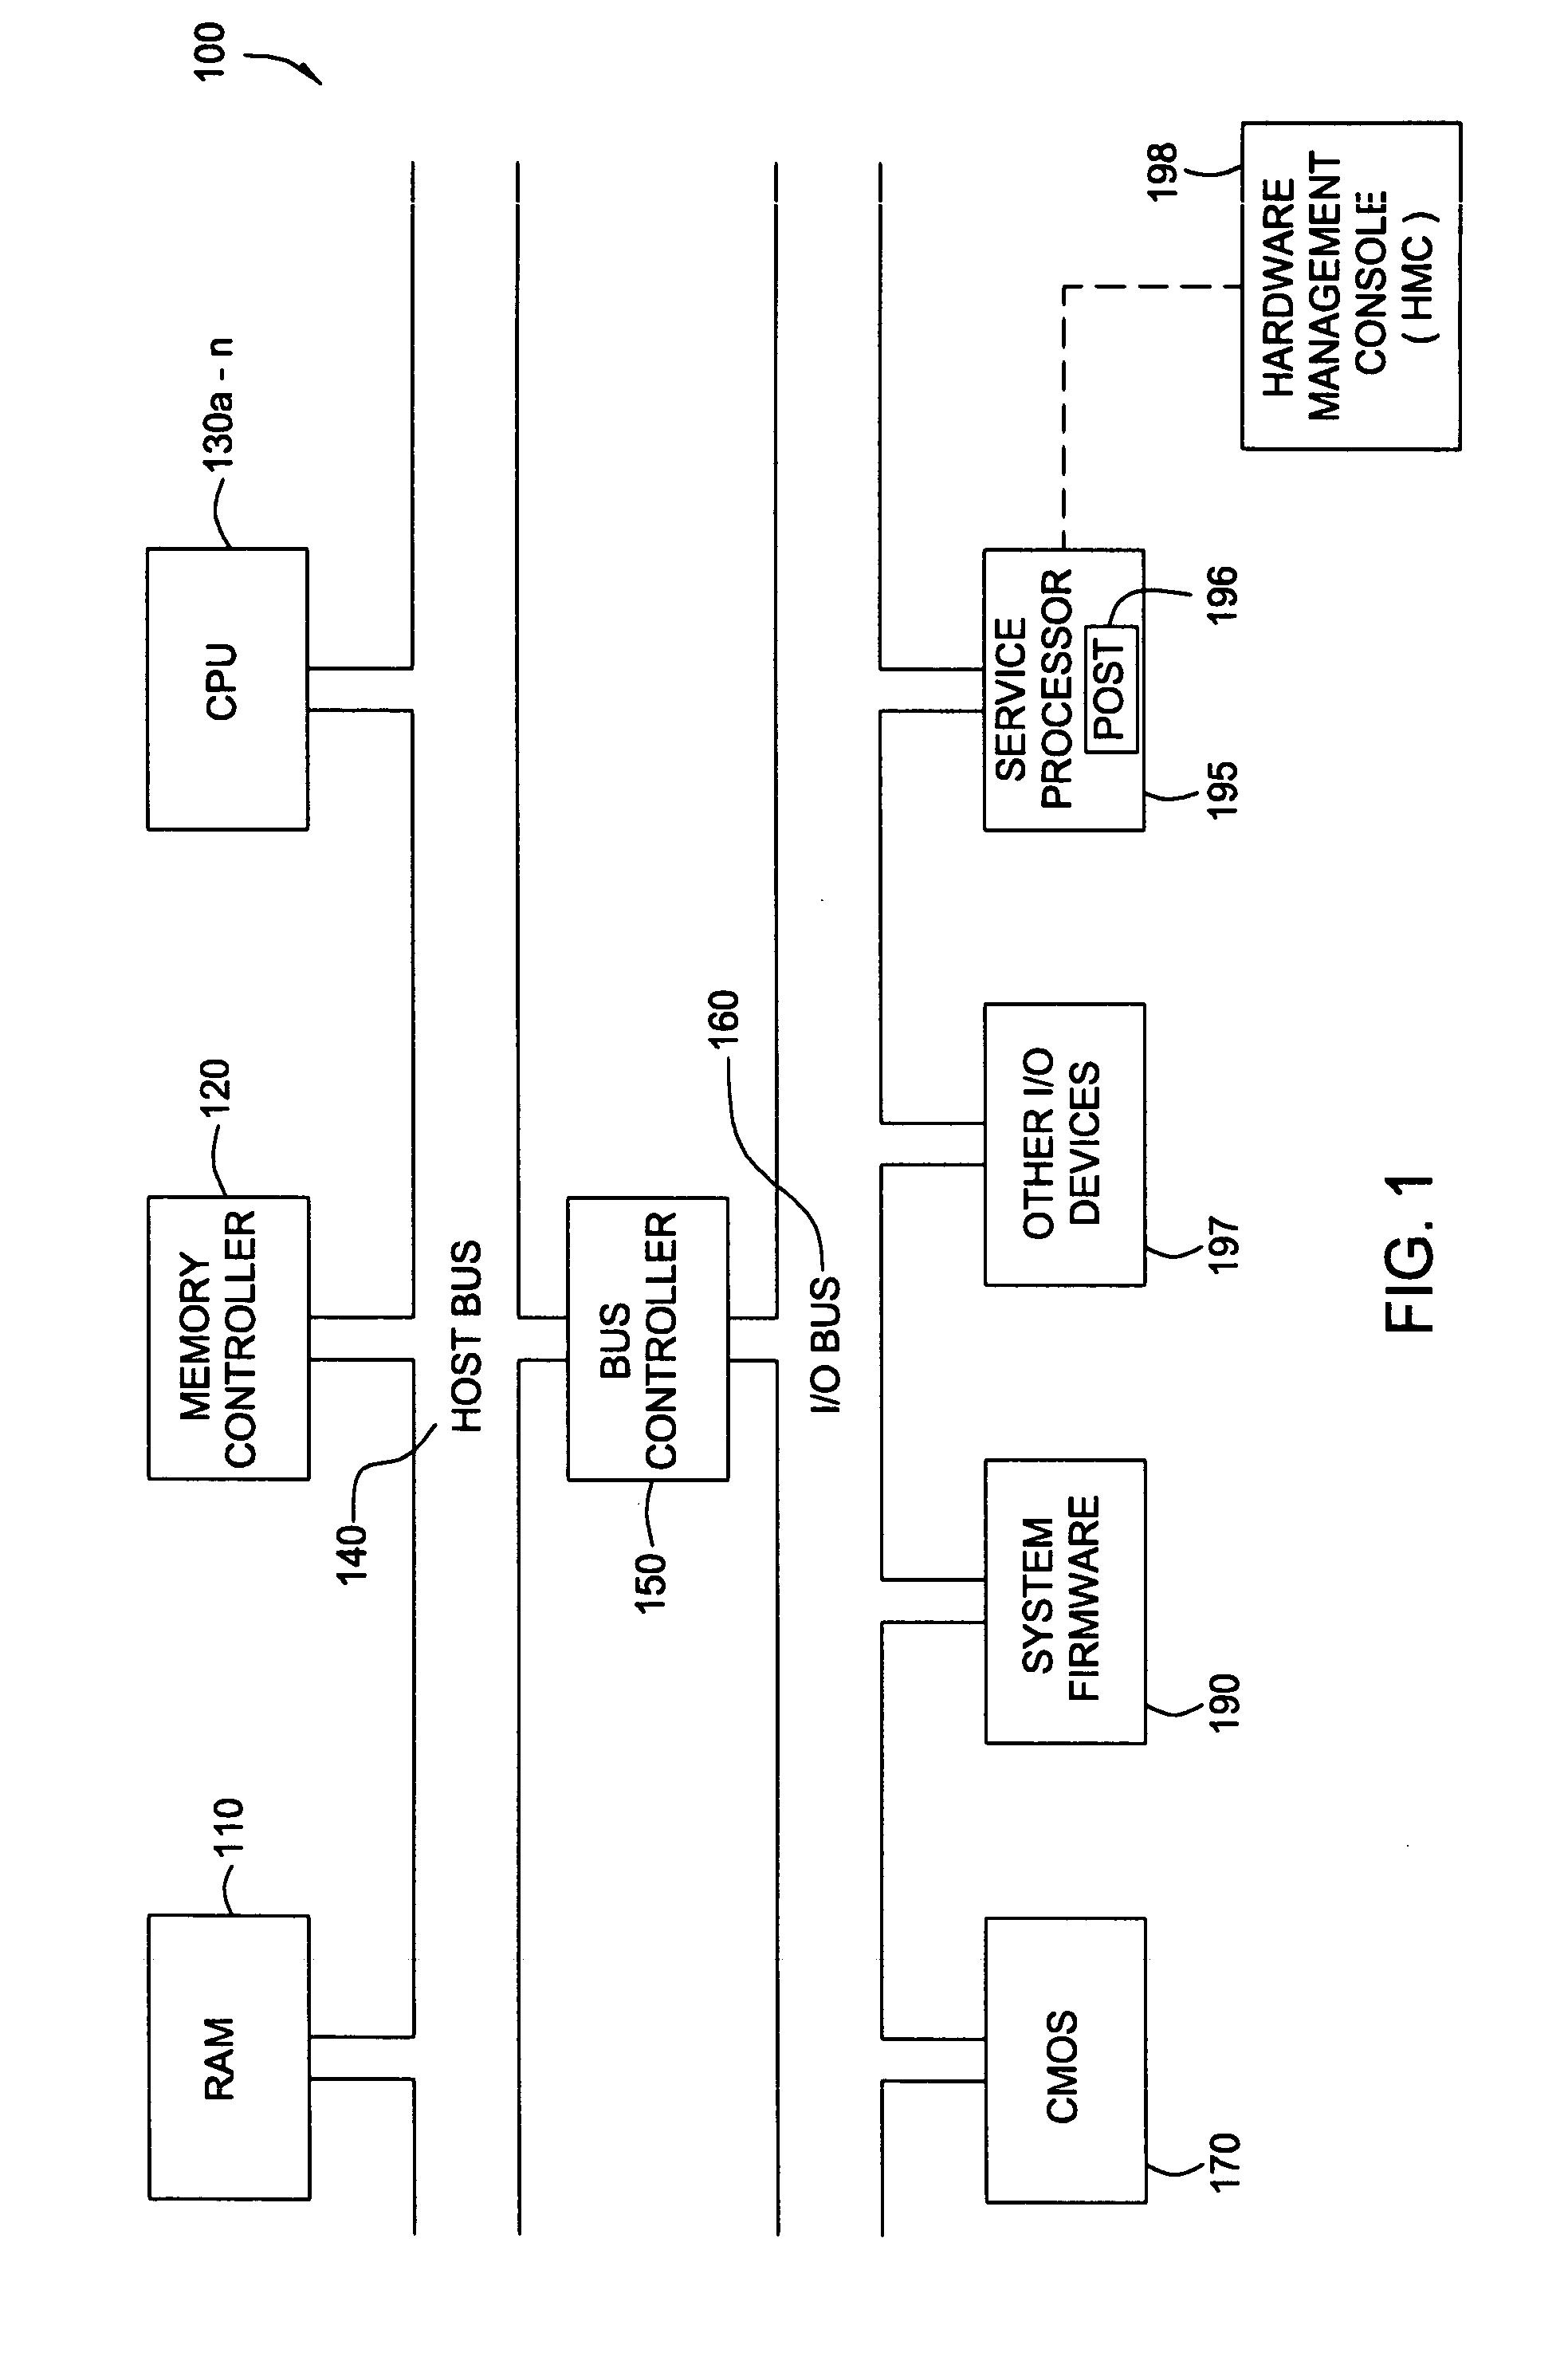 Dynamic scheduling of diagnostic tests to be performed during a system boot process